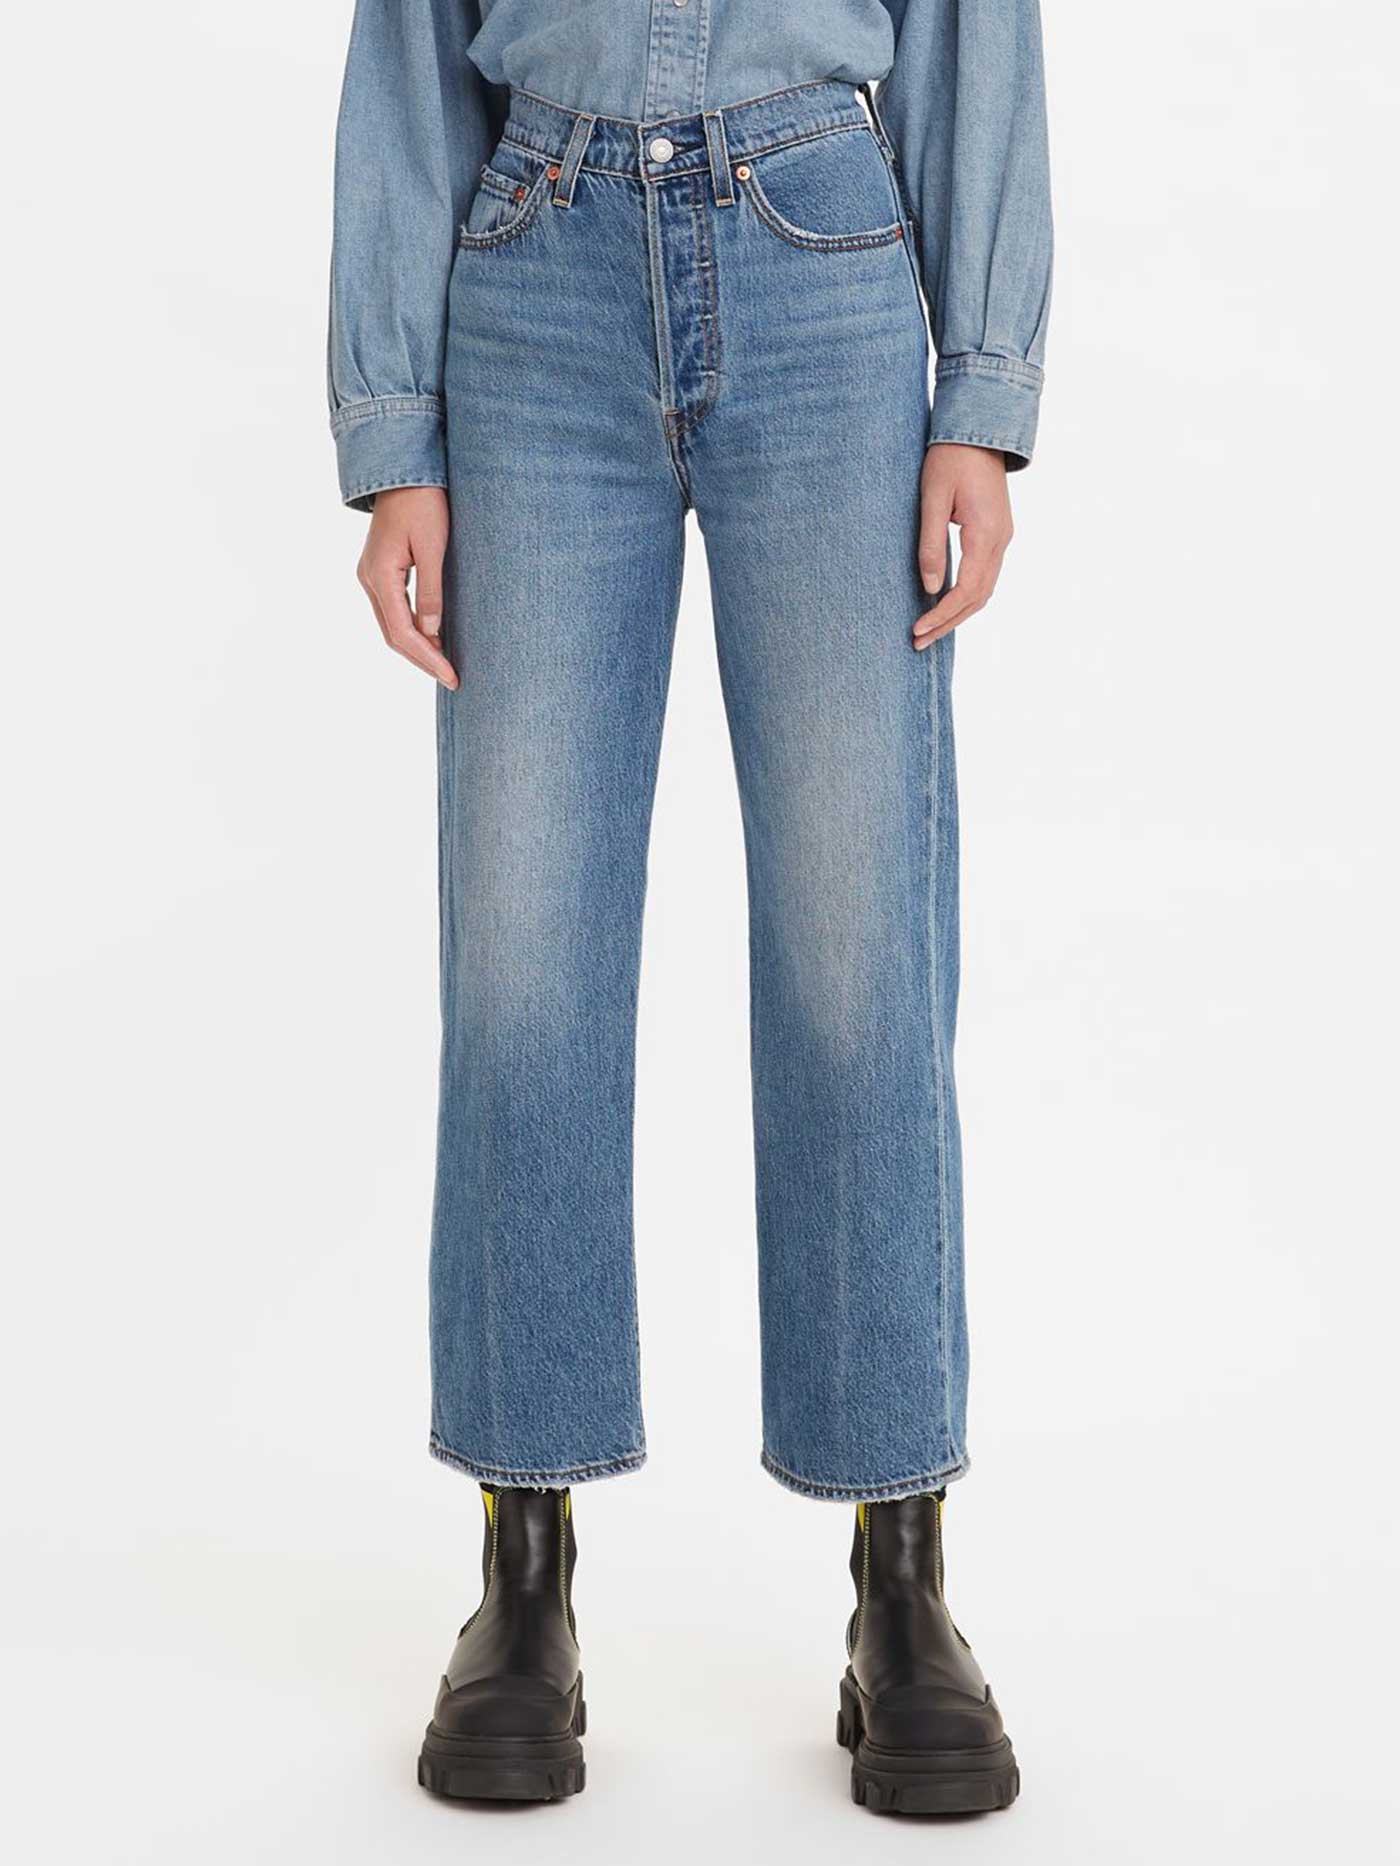 Levi's Ribcage Straight Ankle Jeans | EMPIRE